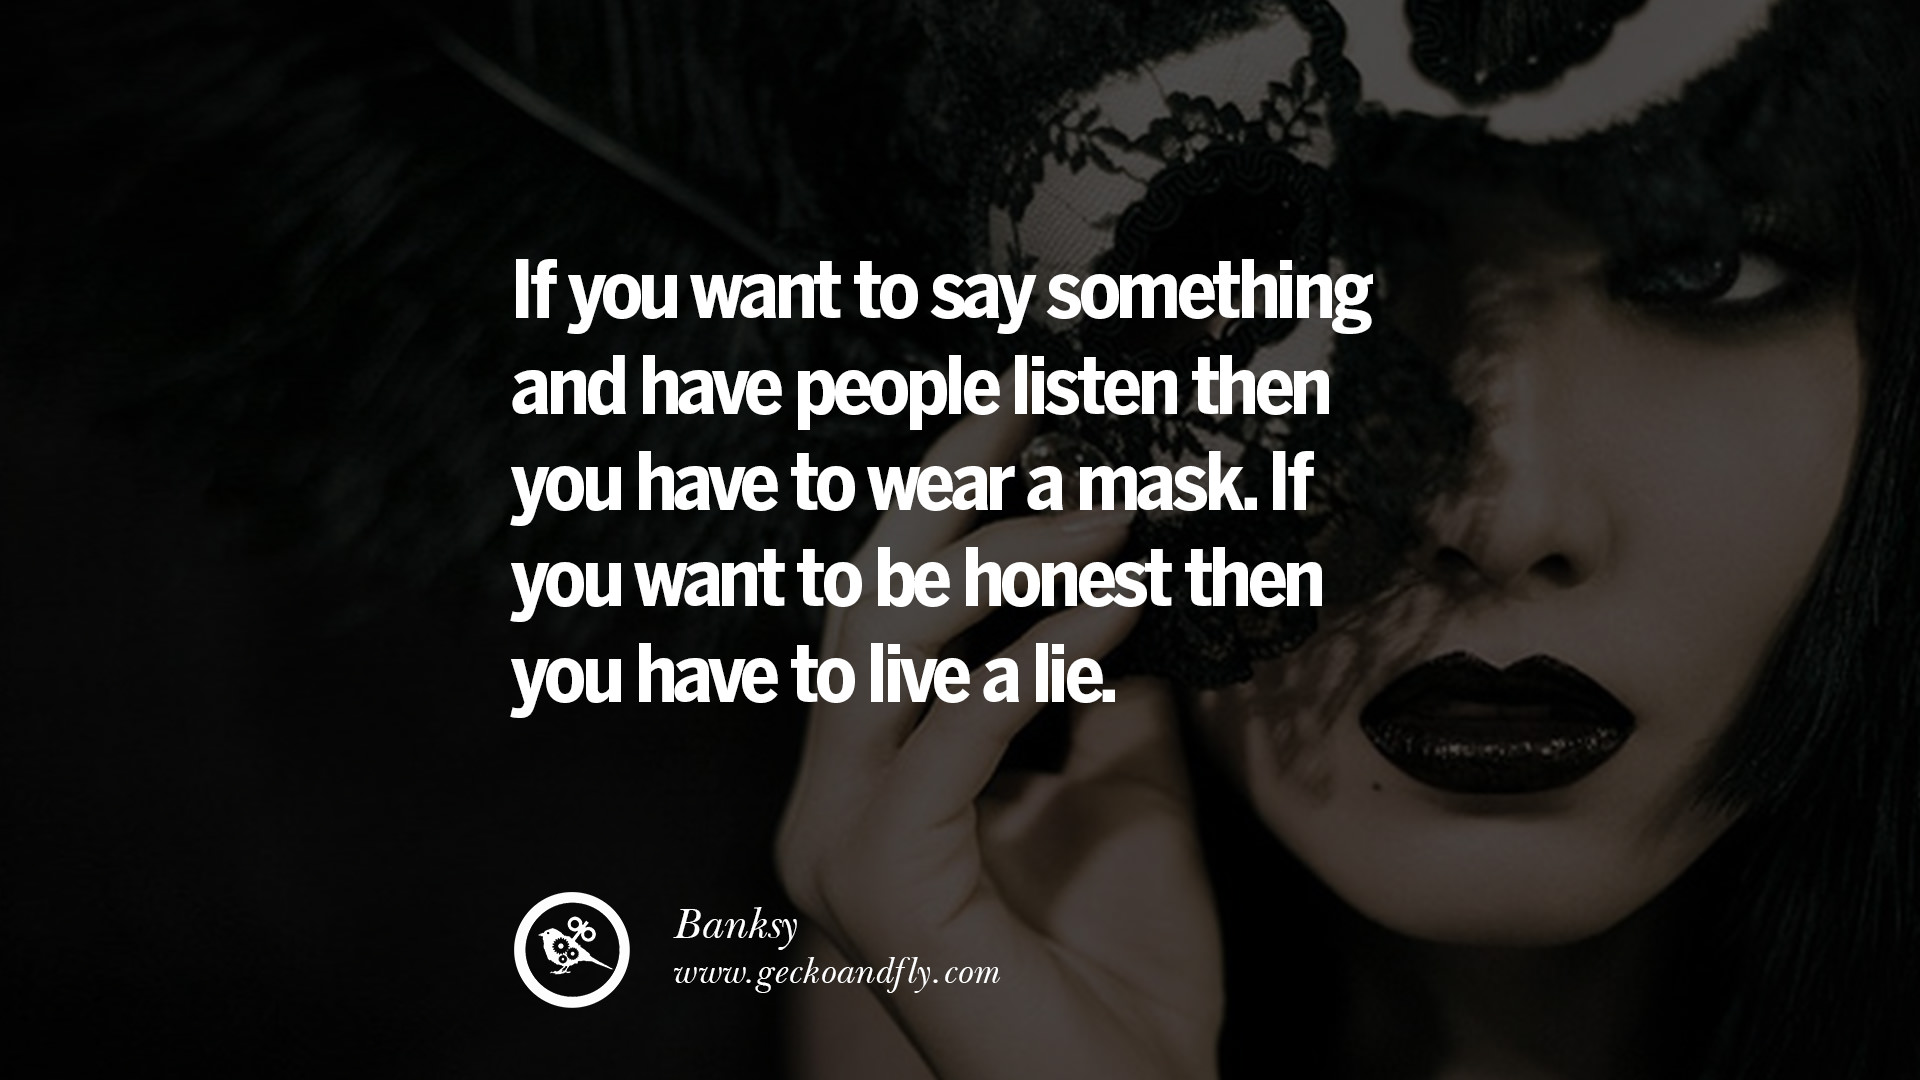 20 Quotes on Wearing a Mask Lying and Hiding eself